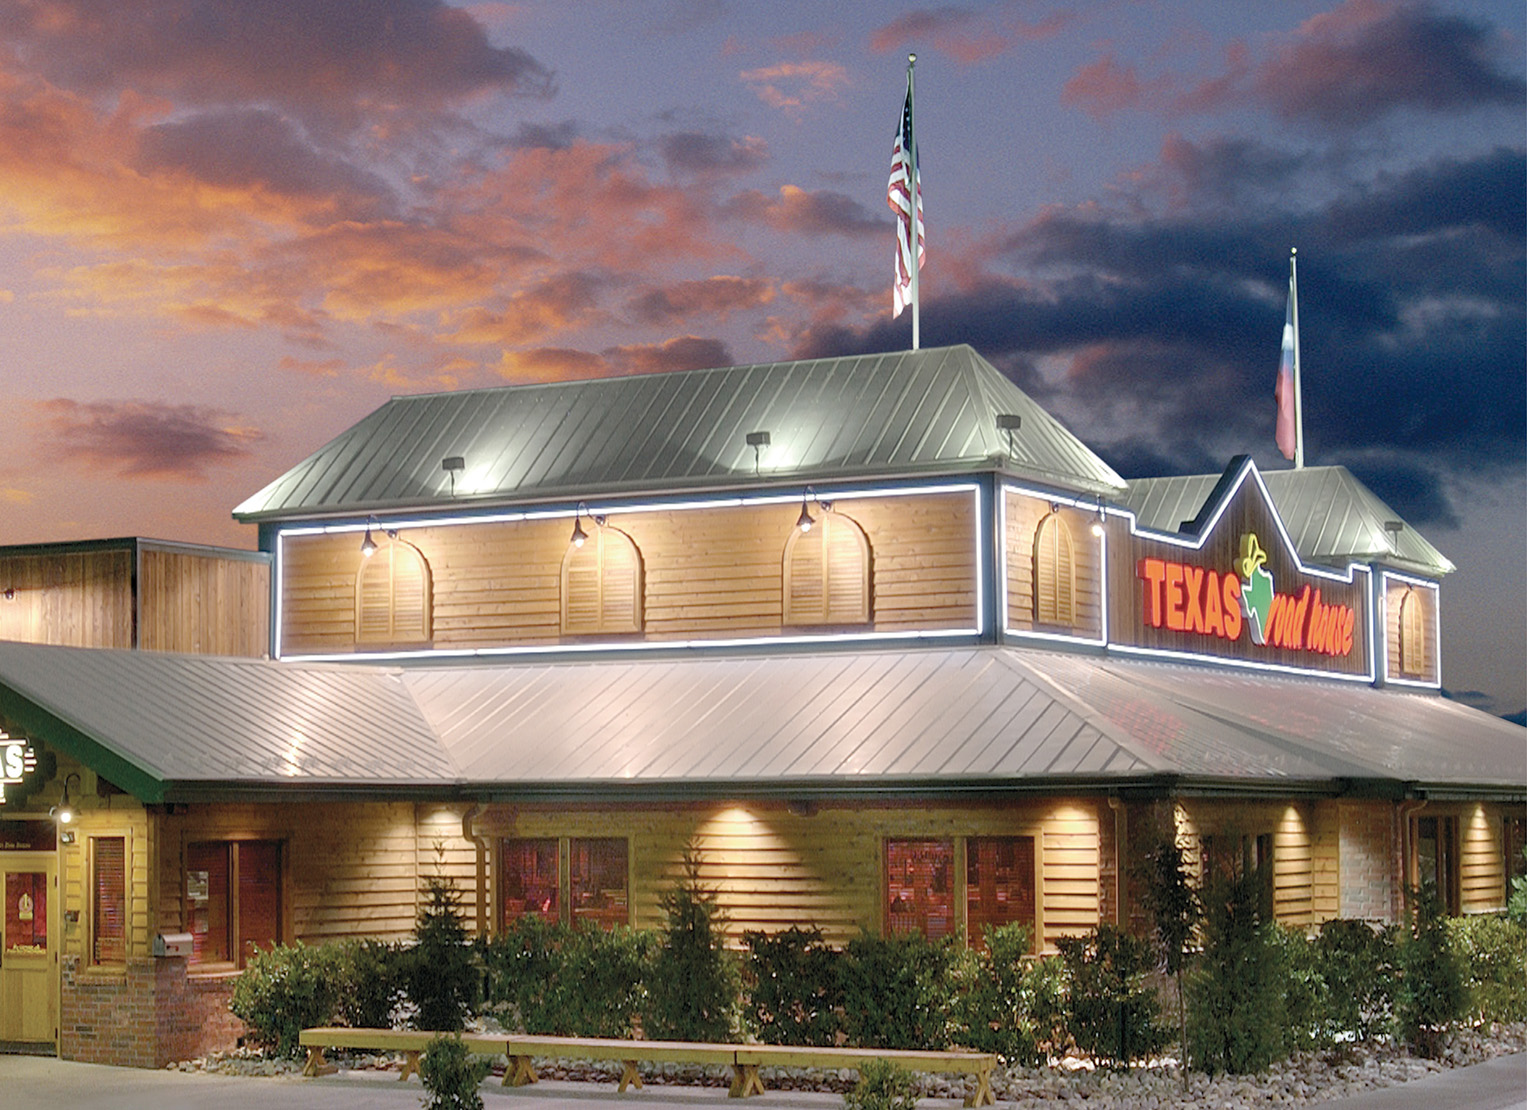 Construction Of Texas Roadhouse Eatery To Begin Soon; October Opening